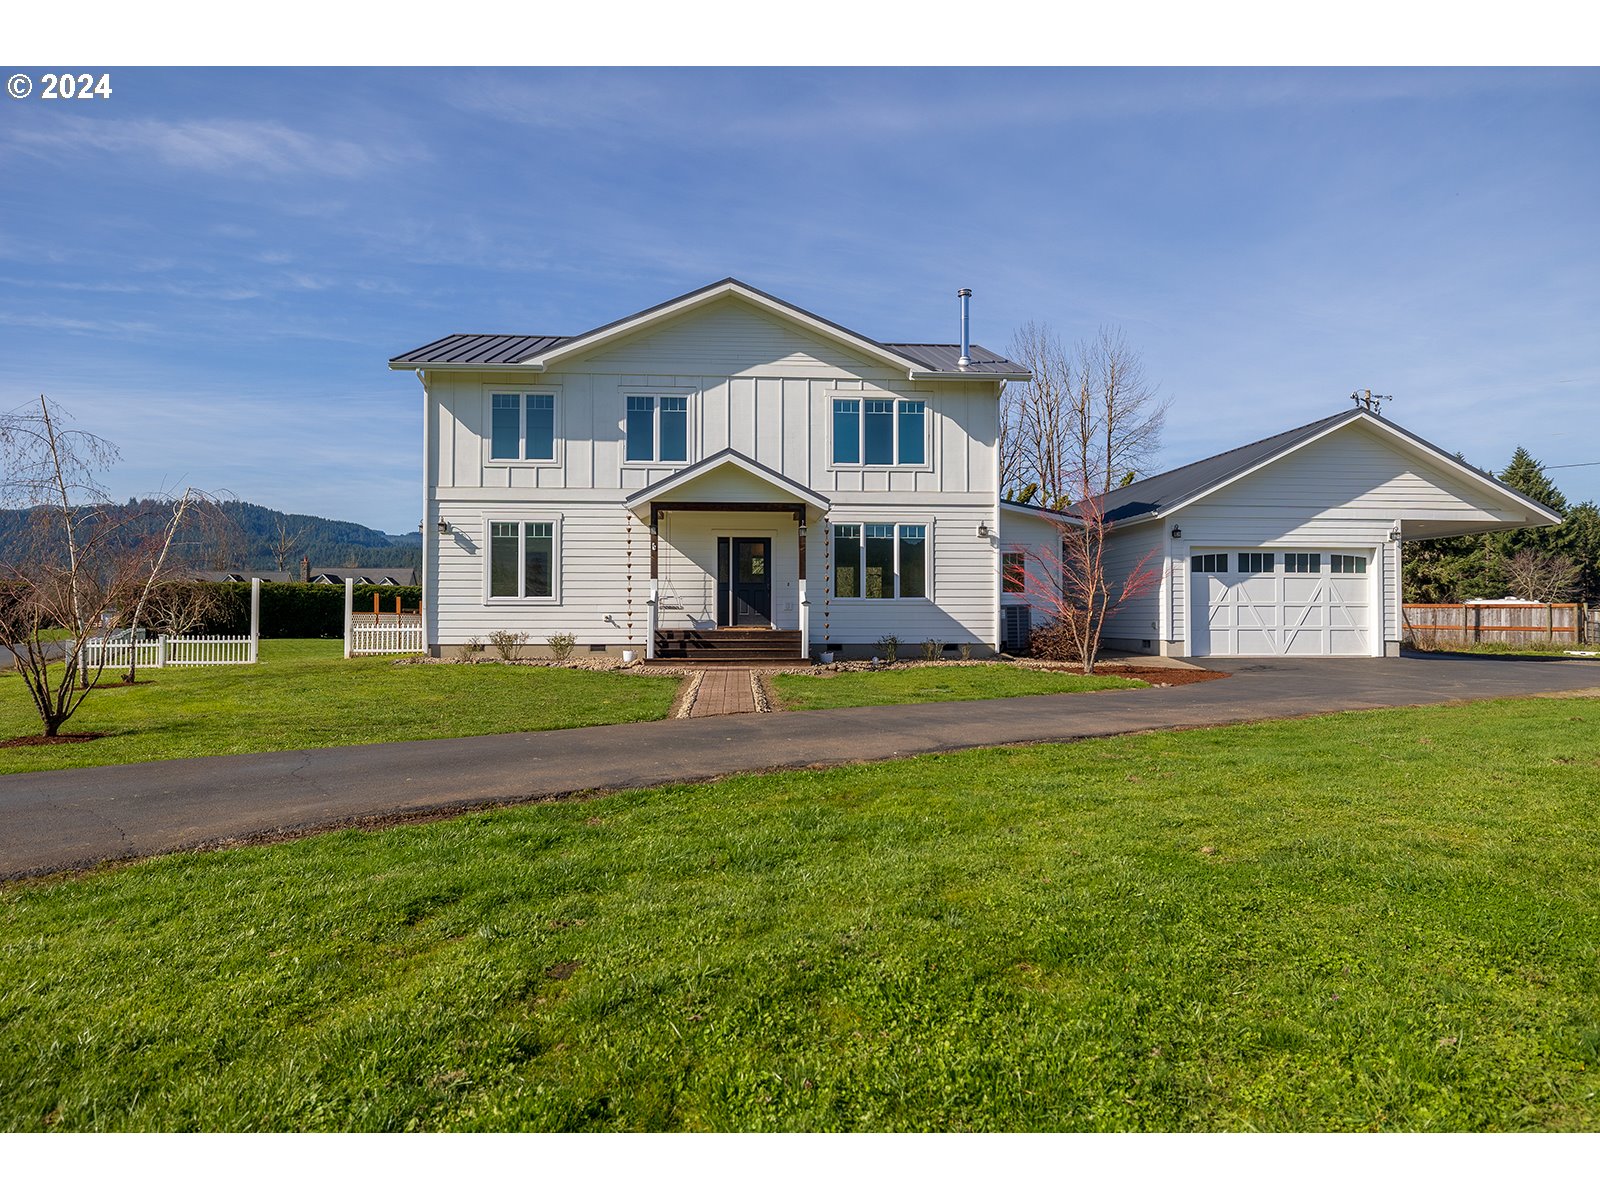 36849 TOVEY DR, Springfield, OR 97478